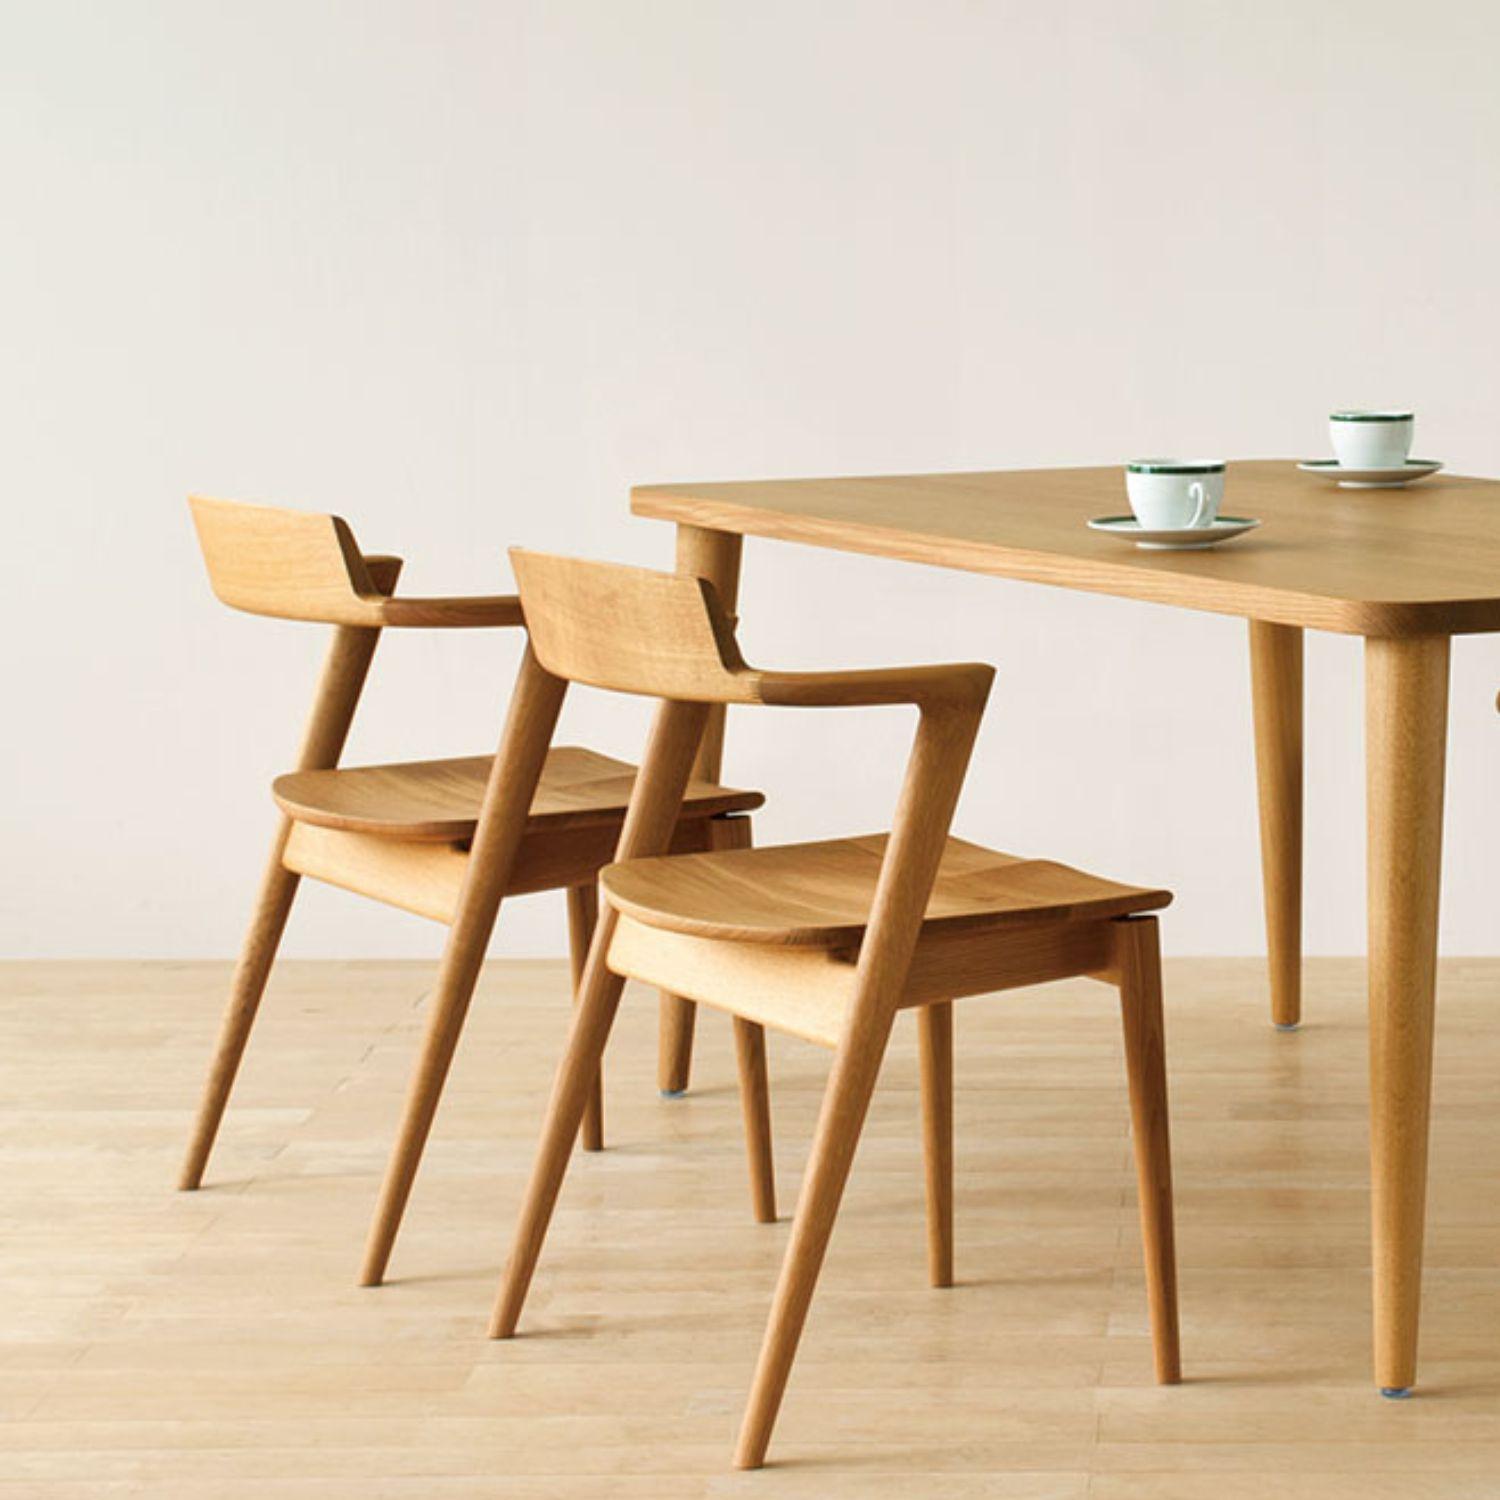 Motomi Kawakami 'Seoto KD21' semi-arm dining chair in oak for Hida.

For centuries, famed Hida artisans in Gifu prefecture have played a role in Japan's woodworking culture, crafting iconic bentwood furniture from sustainable local forests.